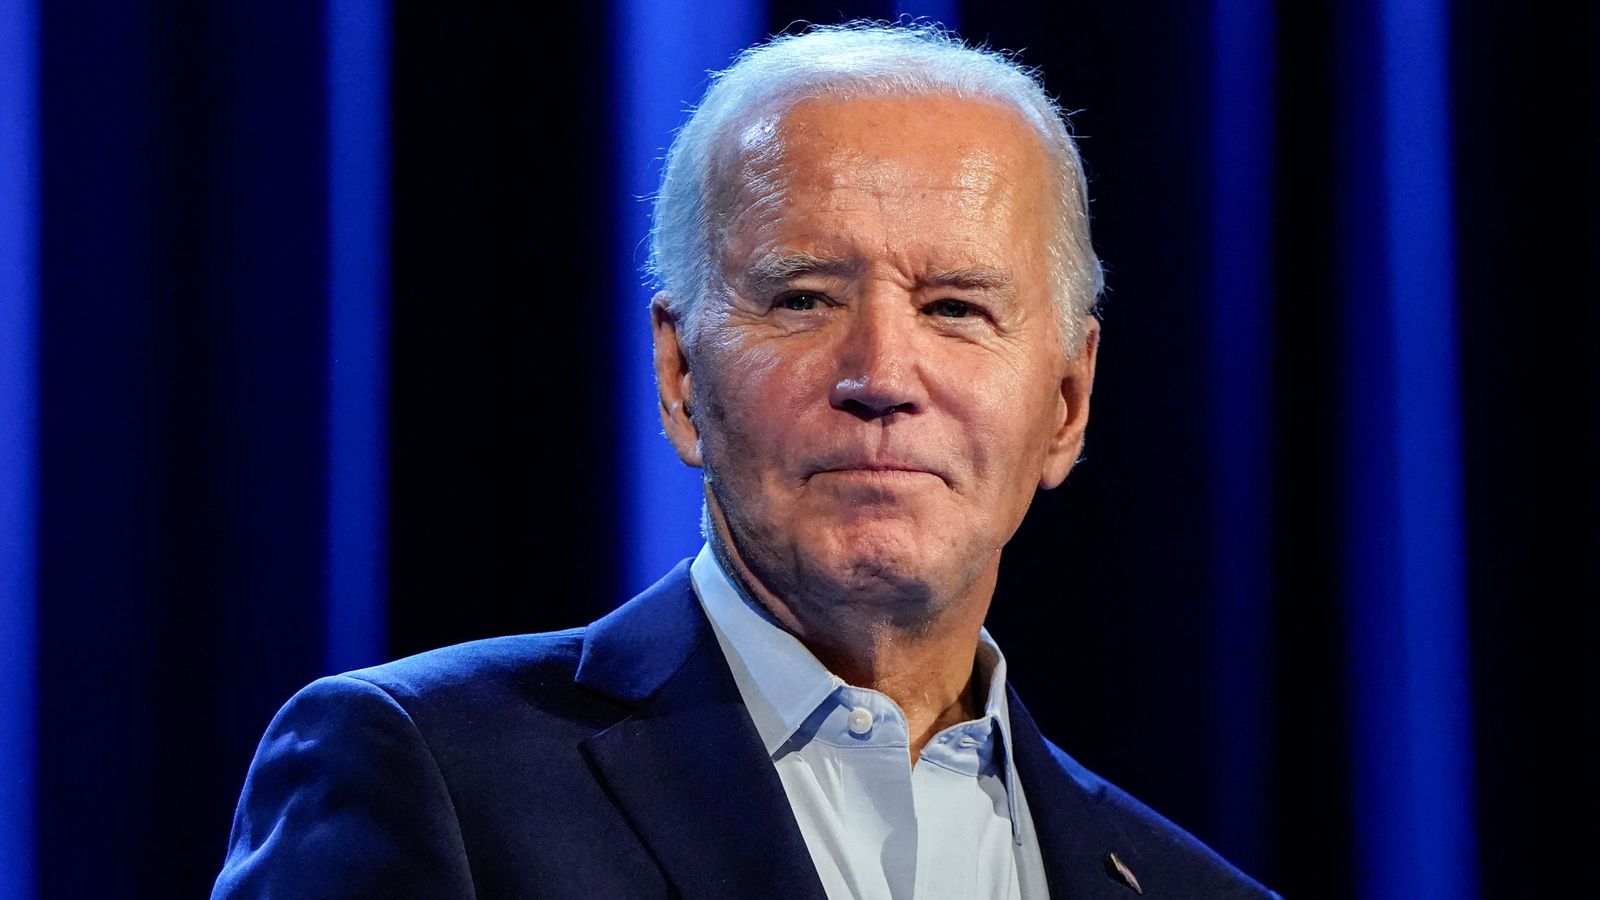 Joe Biden criticised by Trump campaign for declaring Transgender Day of Visibility on Easter Sunday